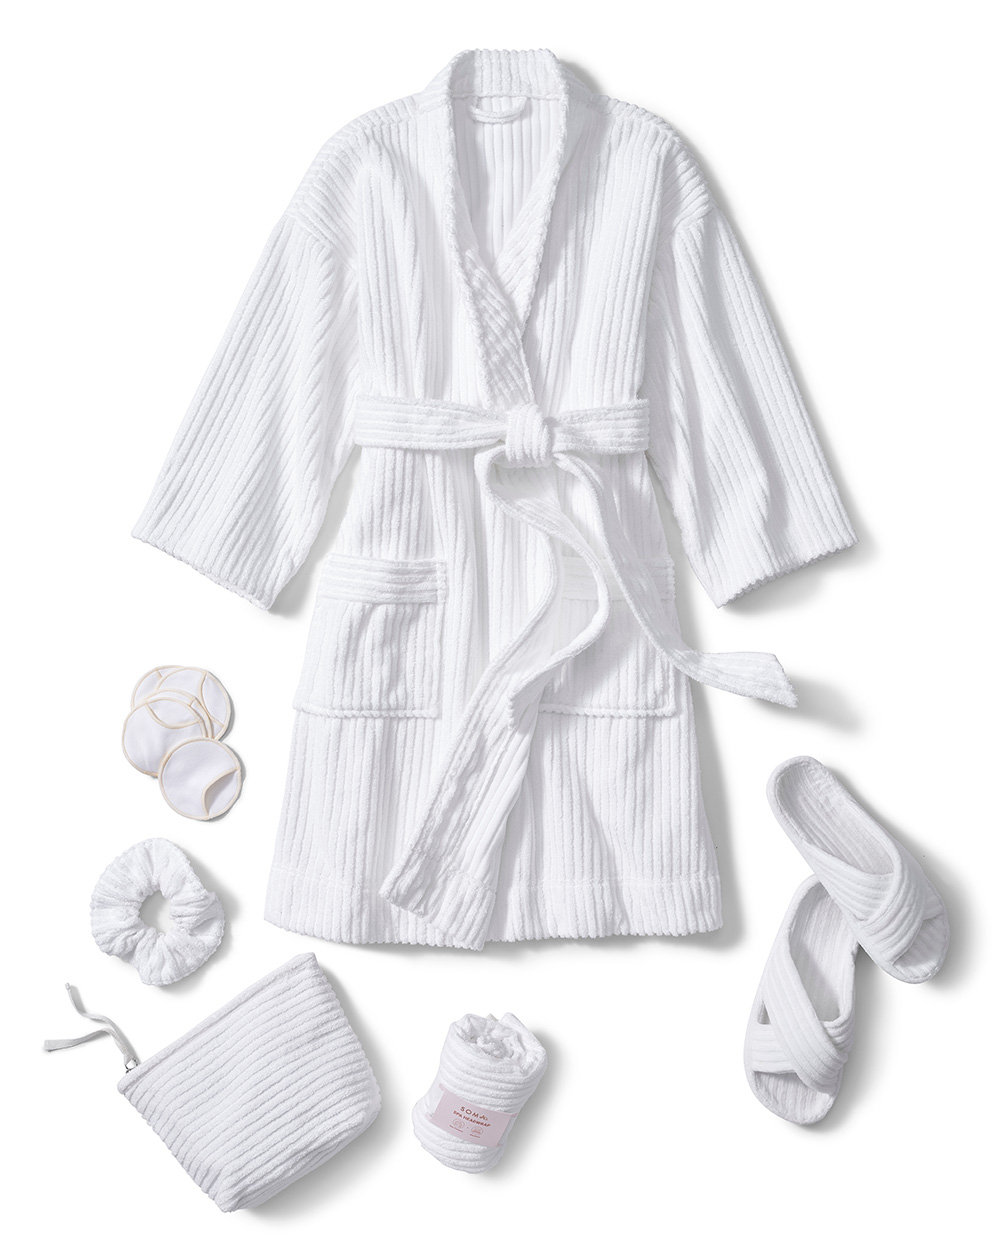 Soma<sup class=st-superscript>®</sup> laydown of a white spa robe, slippers, makeup bag, hair wrap, scrunchie, and makeup rounds.